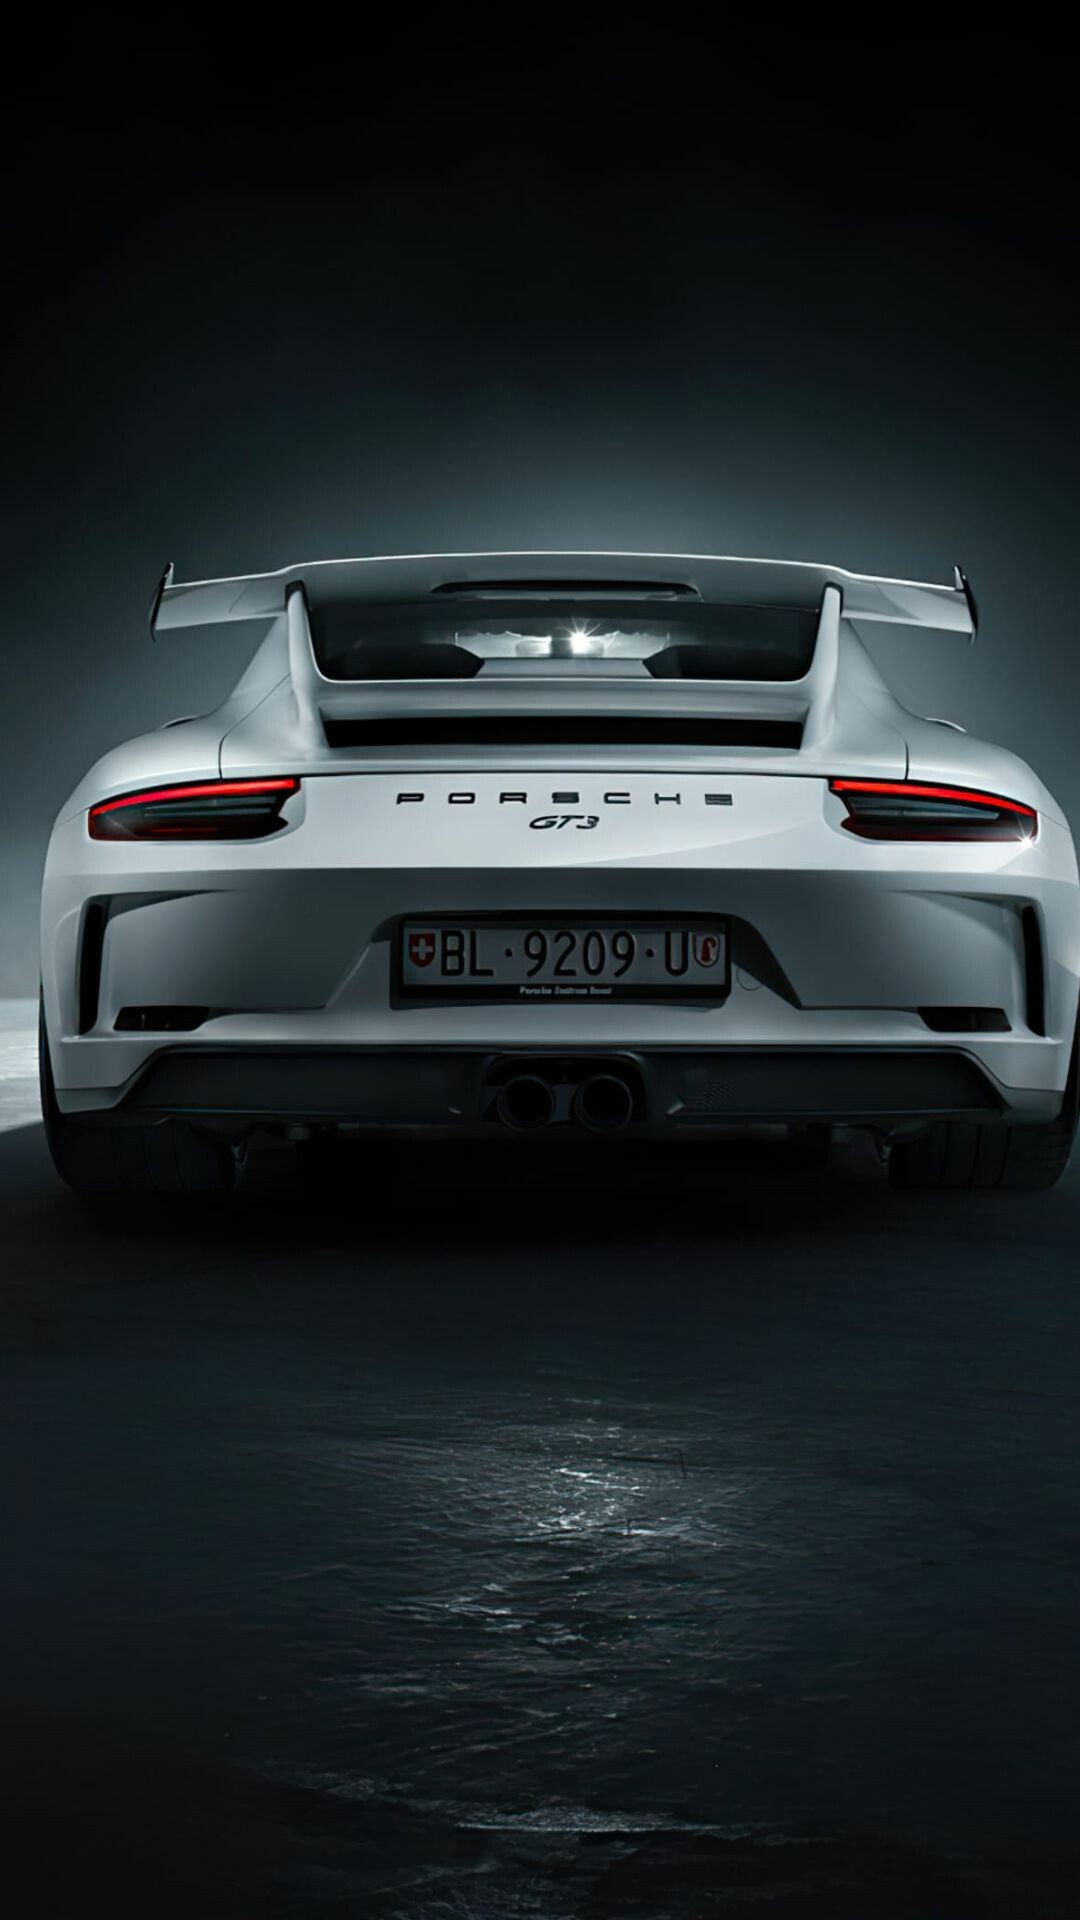 Porsche: Luxury and high-performing vehicles, German carmaker. 1080x1920 Full HD Background.